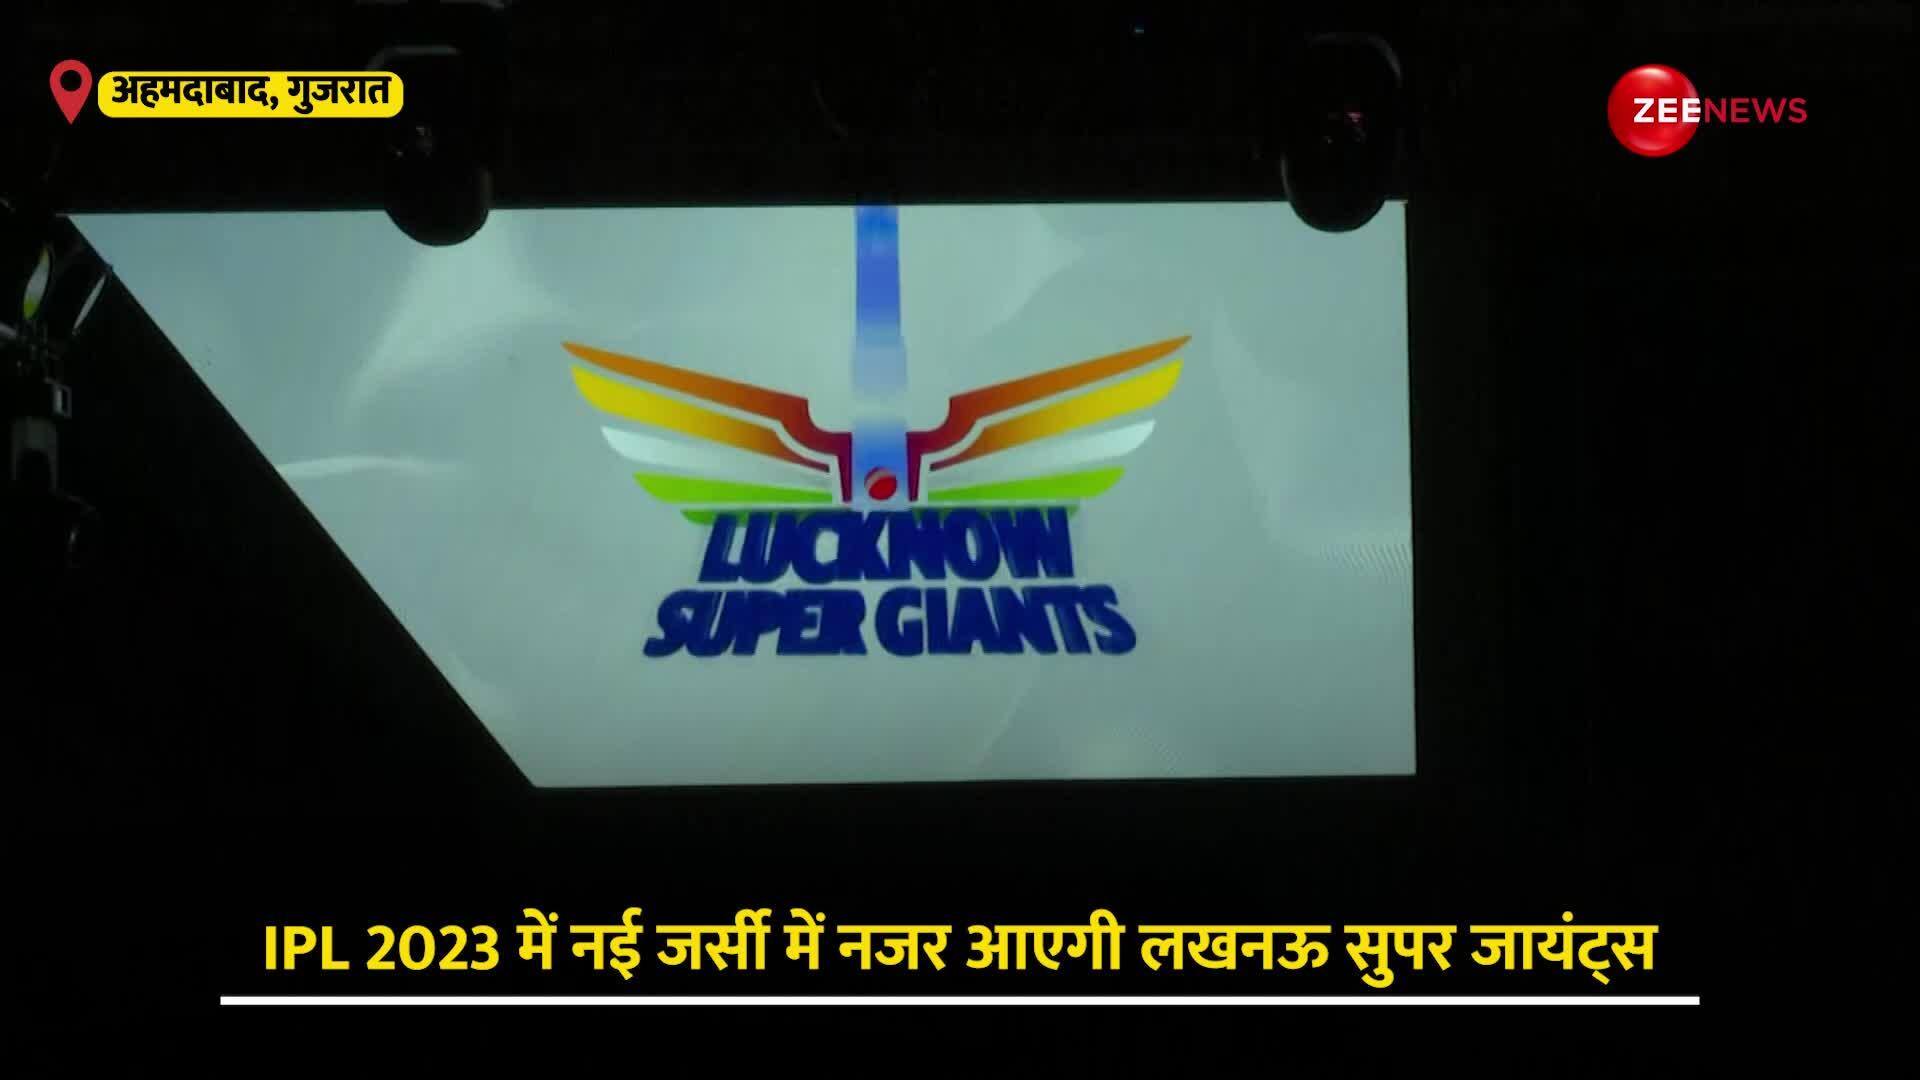 lucknow super giants: Lucknow IPL team to be called Lucknow Super Giants -  The Economic Times